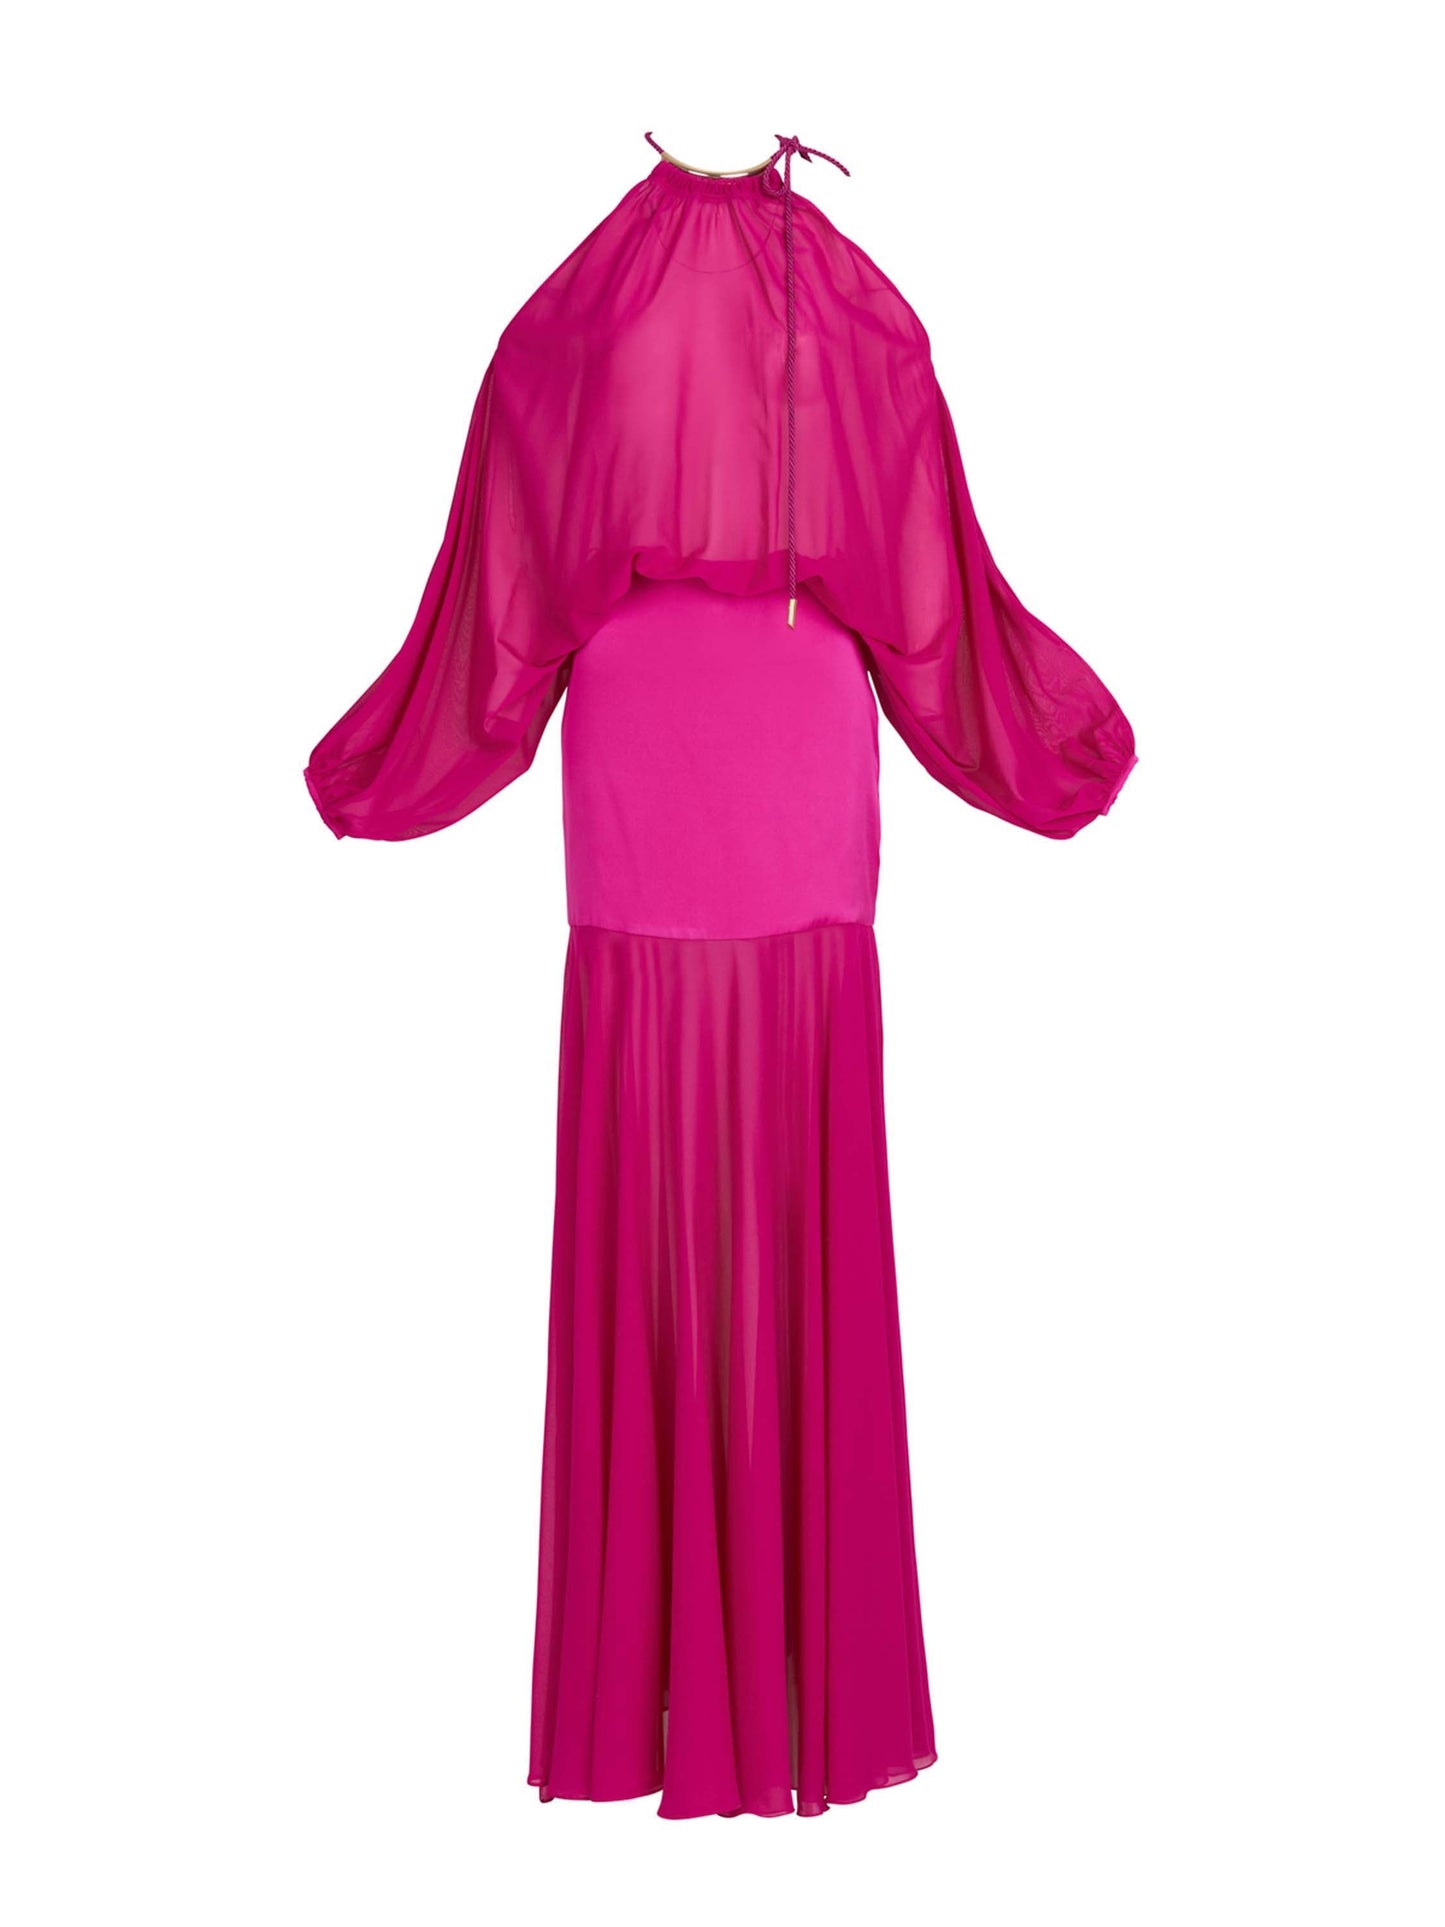 Isadora Dress Fuchsia with sheer long sleeves and a high neck, displayed on a white background.